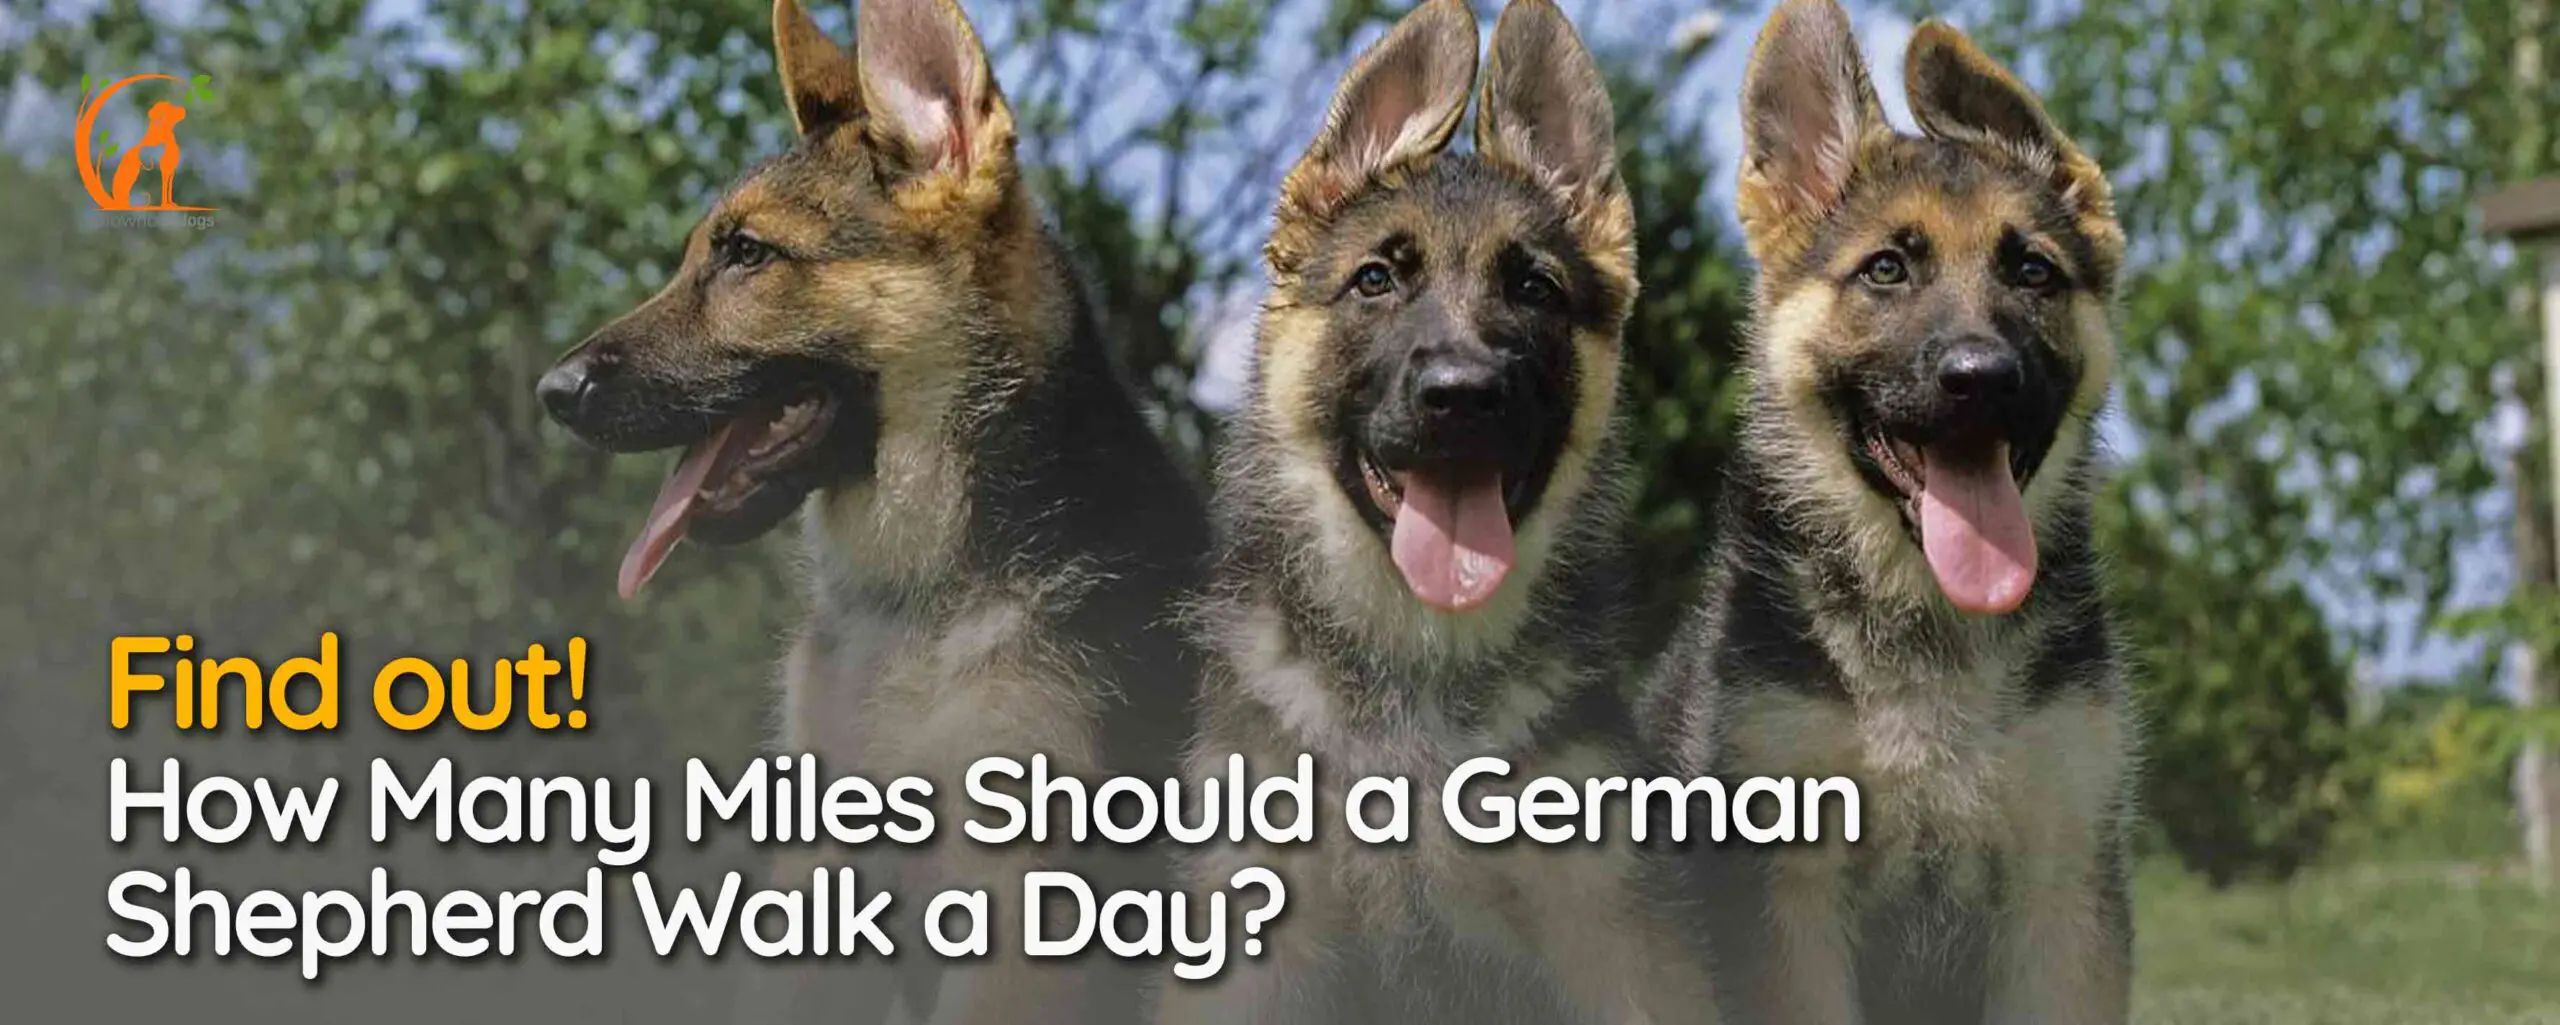 How Many Miles Should a German Shepherd Walk a Day